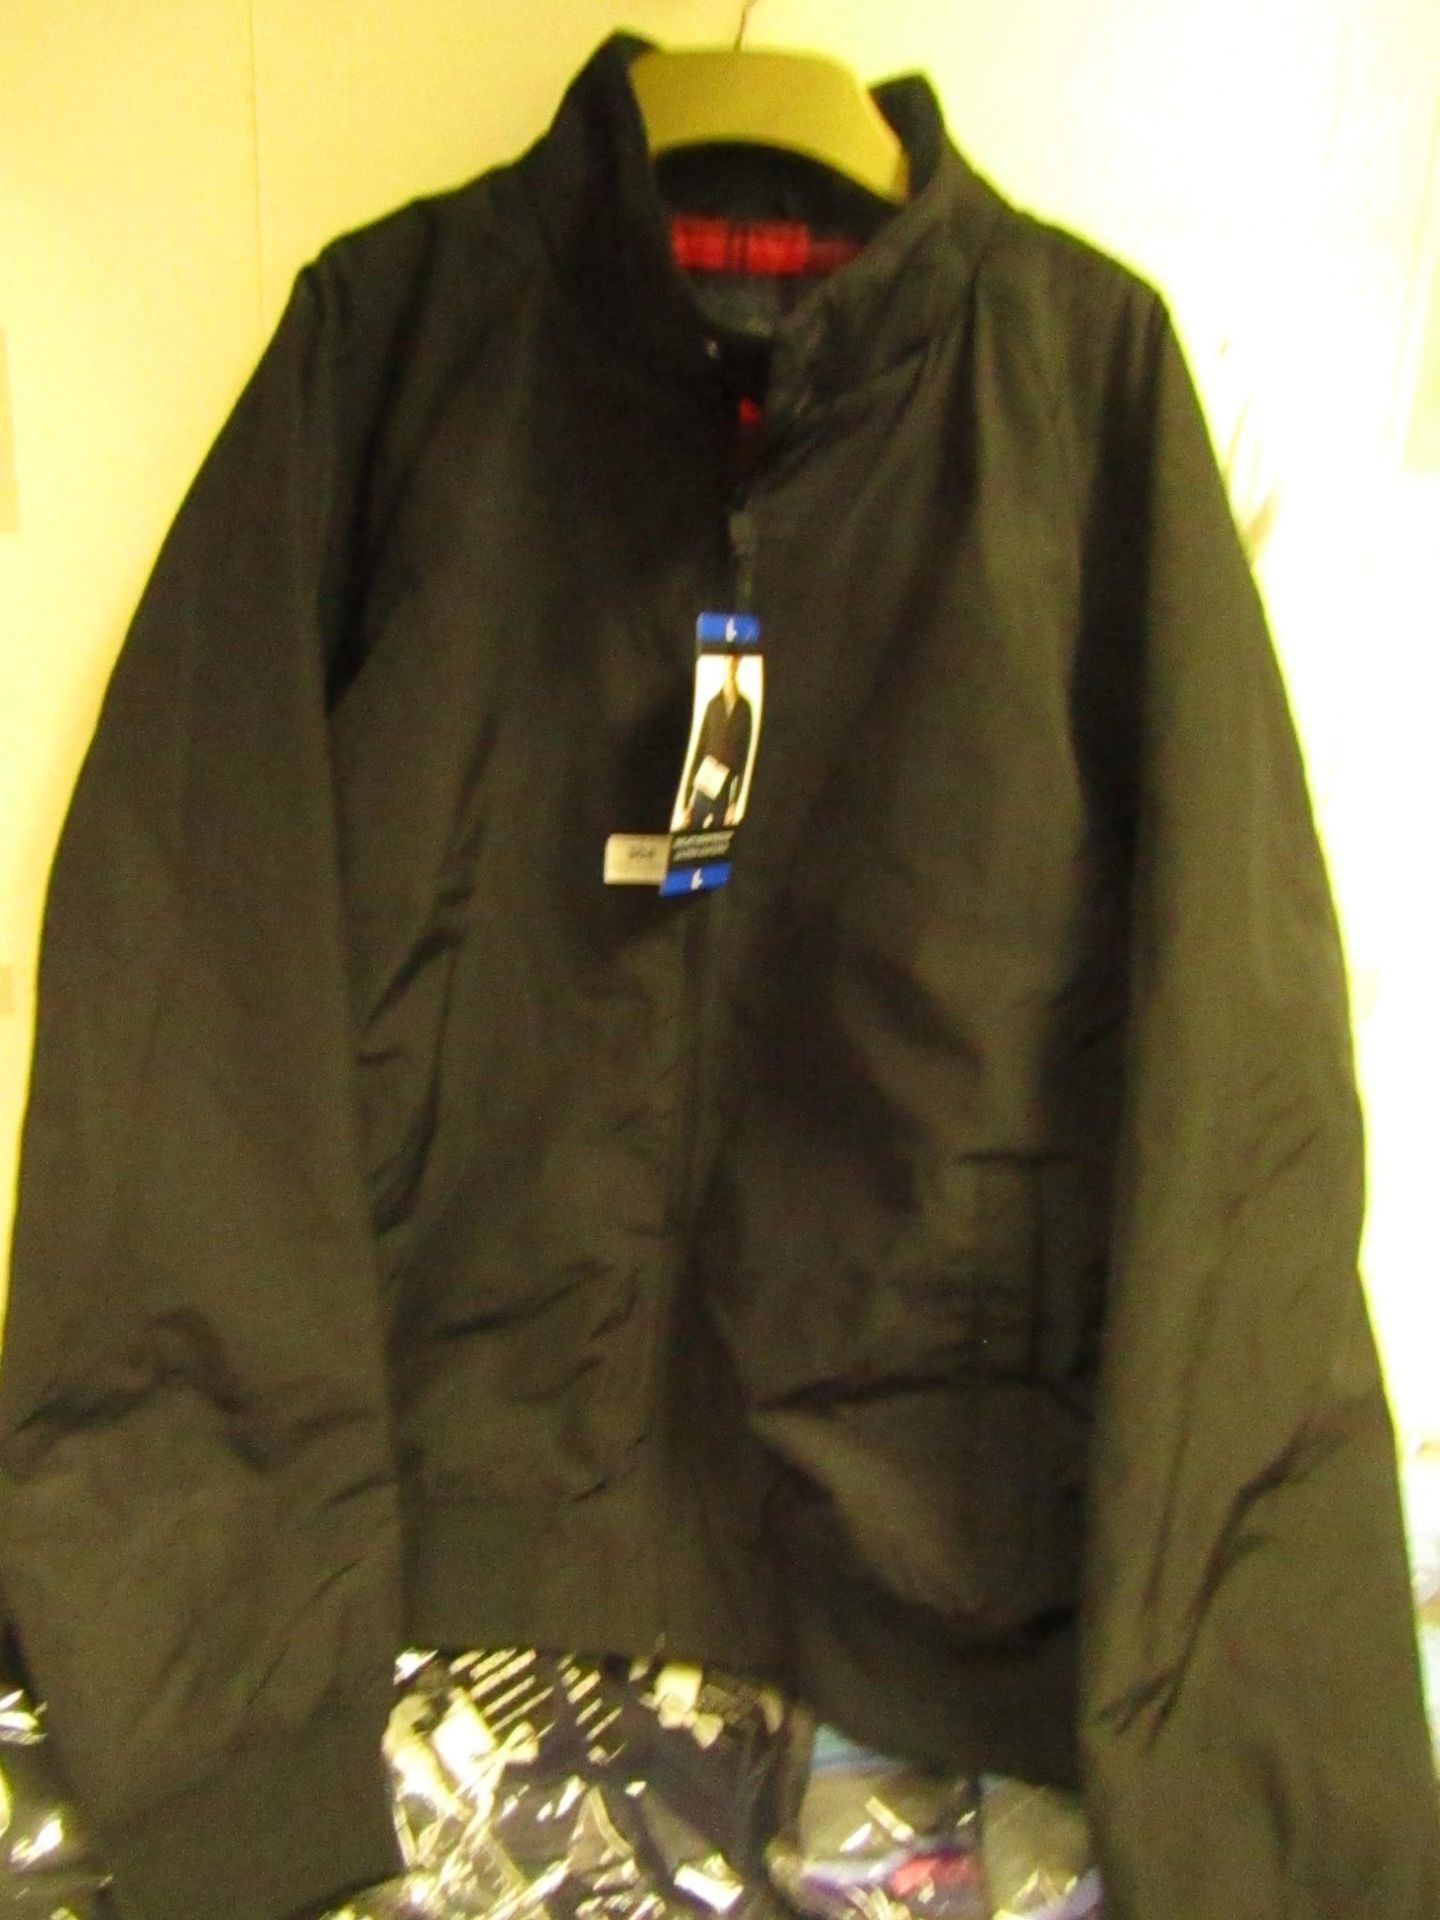 1 x Weather Proof Ultra Oxford Mens Black Jacket size L new with tag